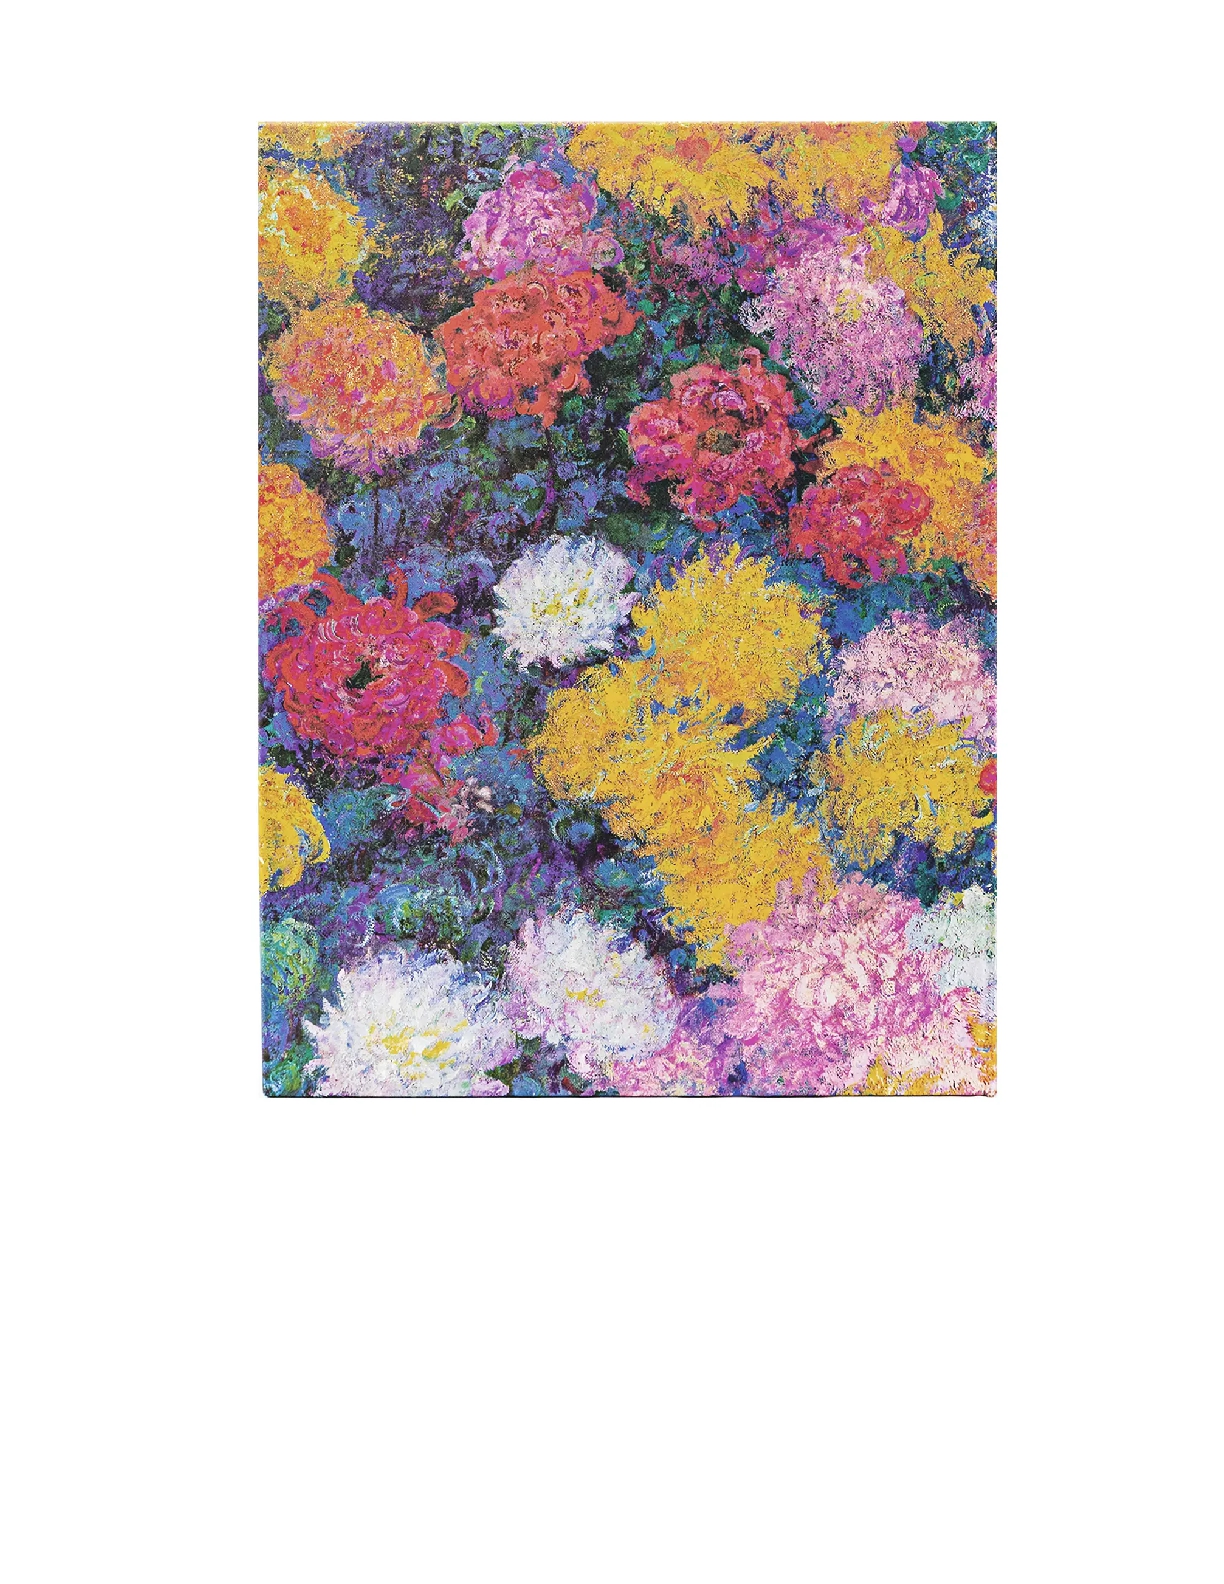 Monet's Chrysanthemums, Hardcover Journals, Ultra, Unlined, Elastic Band, 144 Pg, 120 GSM